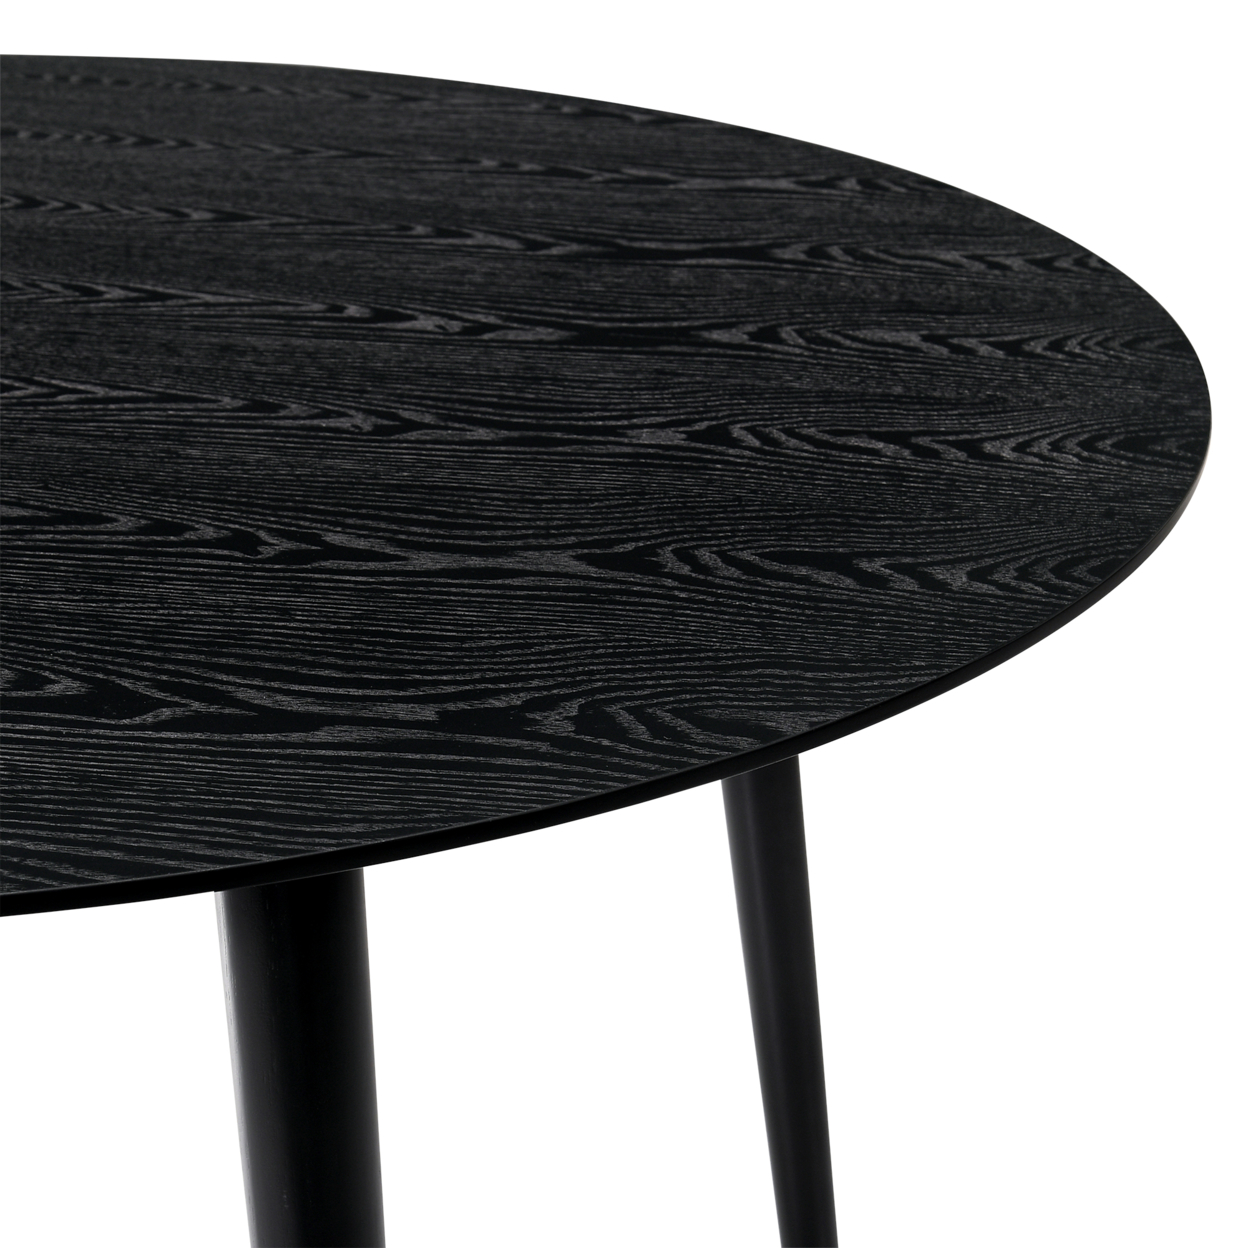 Round Dining Table With Wood And Tapered Legs, Black- Saltoro Sherpi